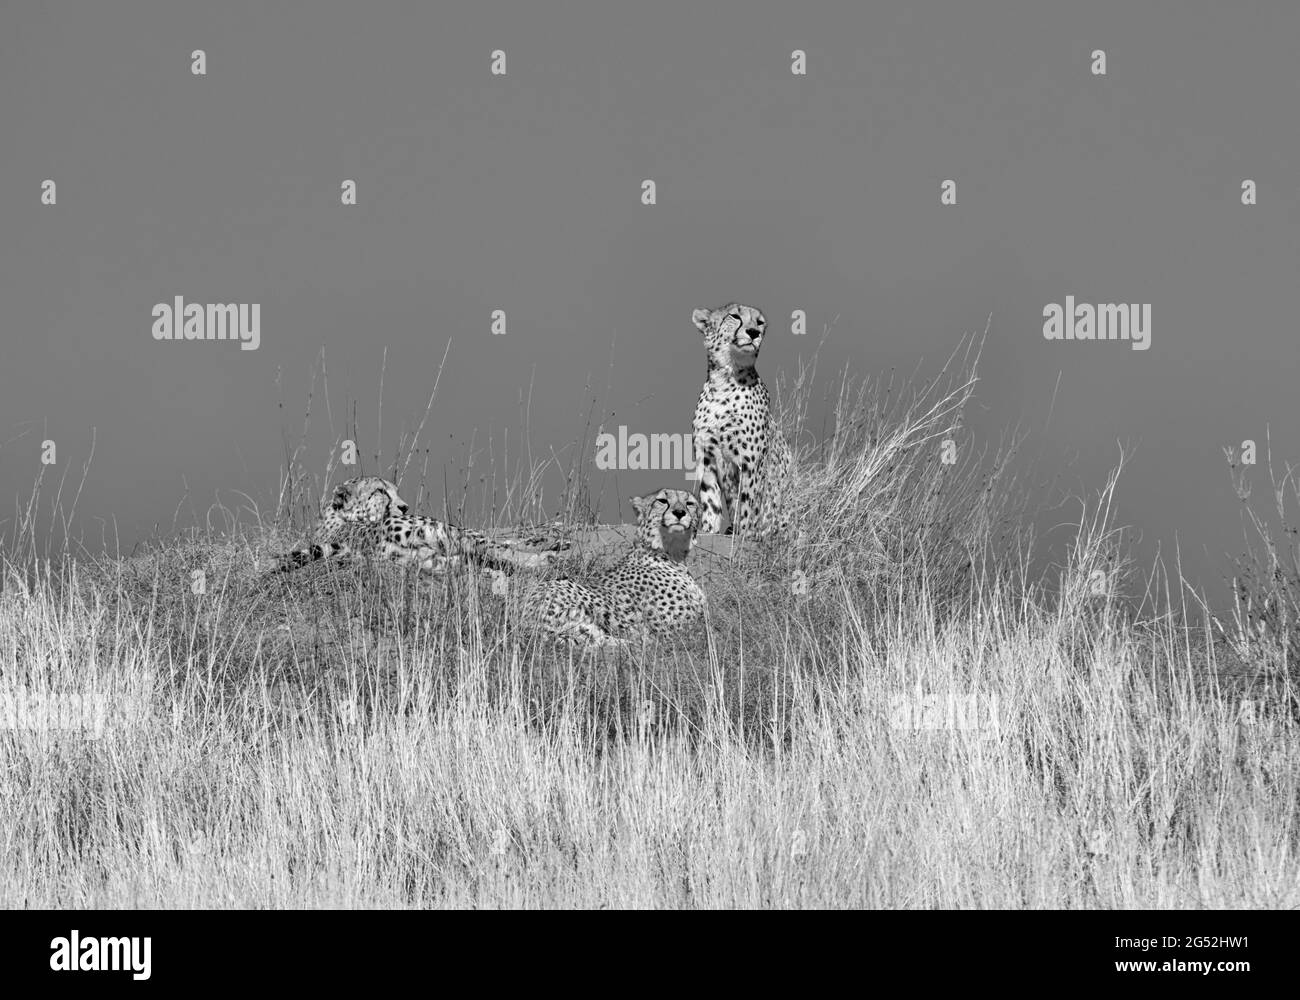 Three Cheetahs resting on top of a dune in Southern African savannah Stock Photo